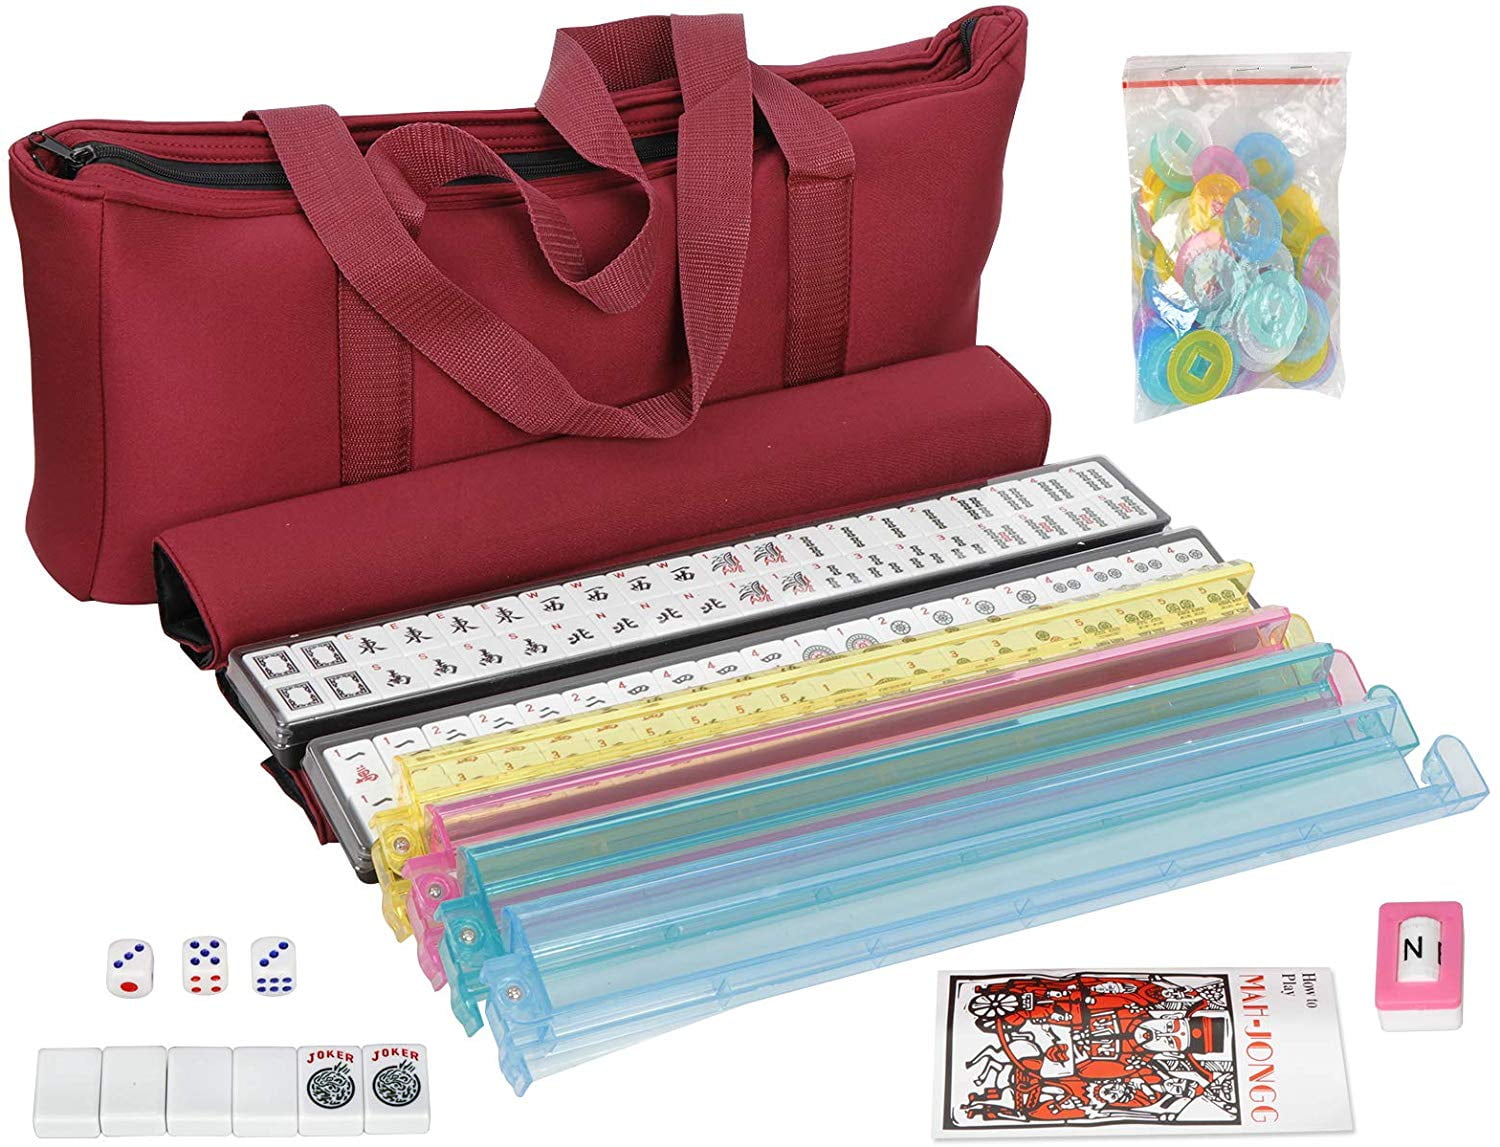 ZENSTYLE American Mah Jongg Mahjong 166 Tile Set with 4 All-in-One  Rack/Pushers,Soft Bag | Hängeregale